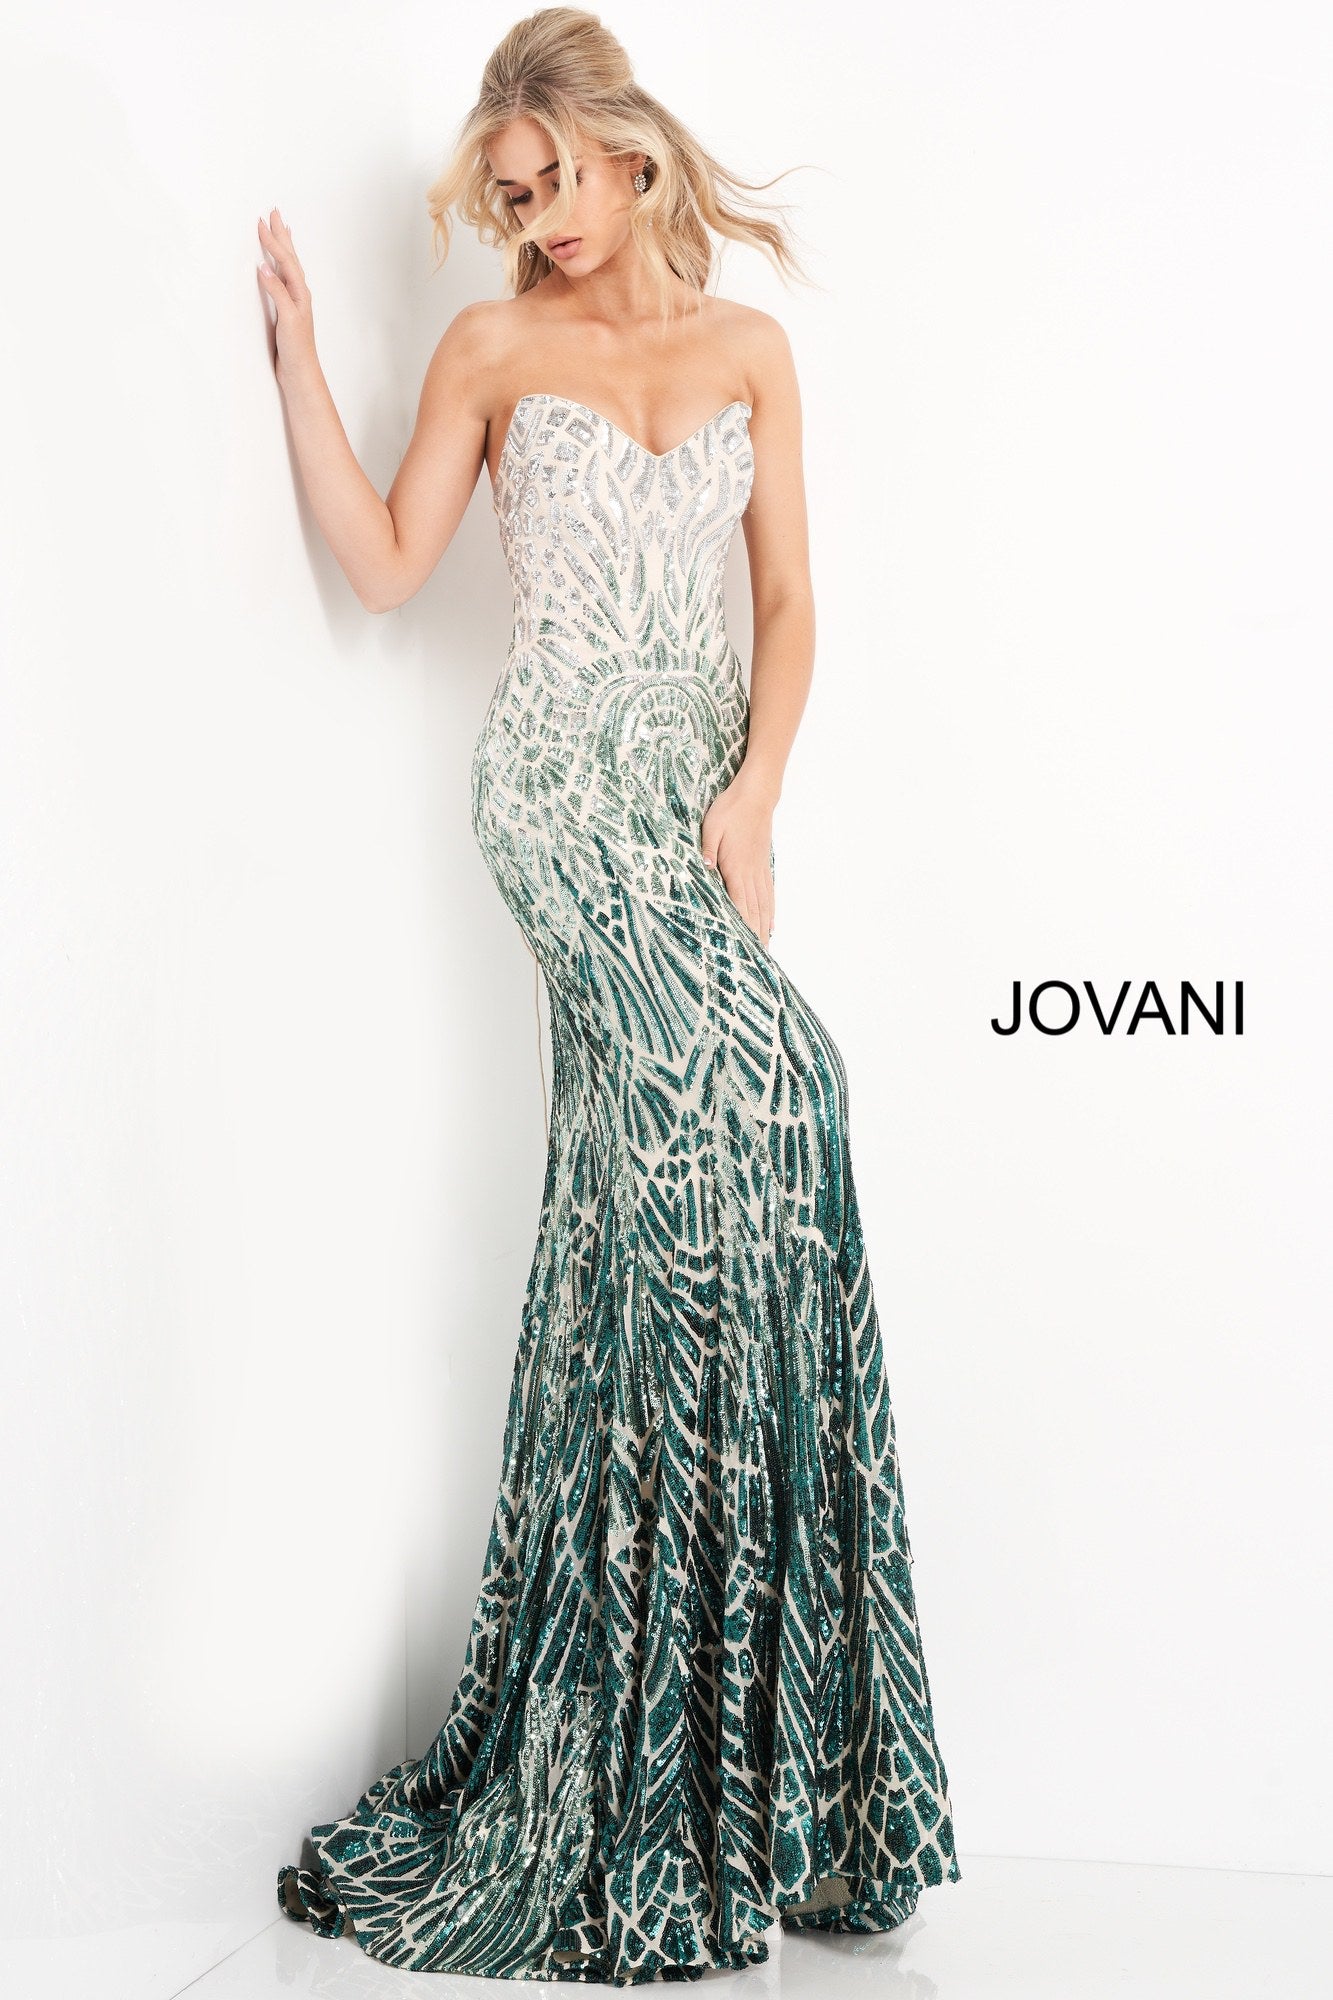 Jovani 06459 is a long fitted Formal Evening Gown. This Strapless Prom Dress Features a Backless open back with a corset style lace up closure. Peak point strapless neckline. Fully Embellished with Sequins in a cascading geometric pattern in an Ombre Design. Lush trumpet skirt with a sweeping train. Perfect for pageants! Available Sizes: 00,0,2,4,6,8,10,12,14,16,18,20,22,24  Available Colors: Silver/Cafe, Silver/Green